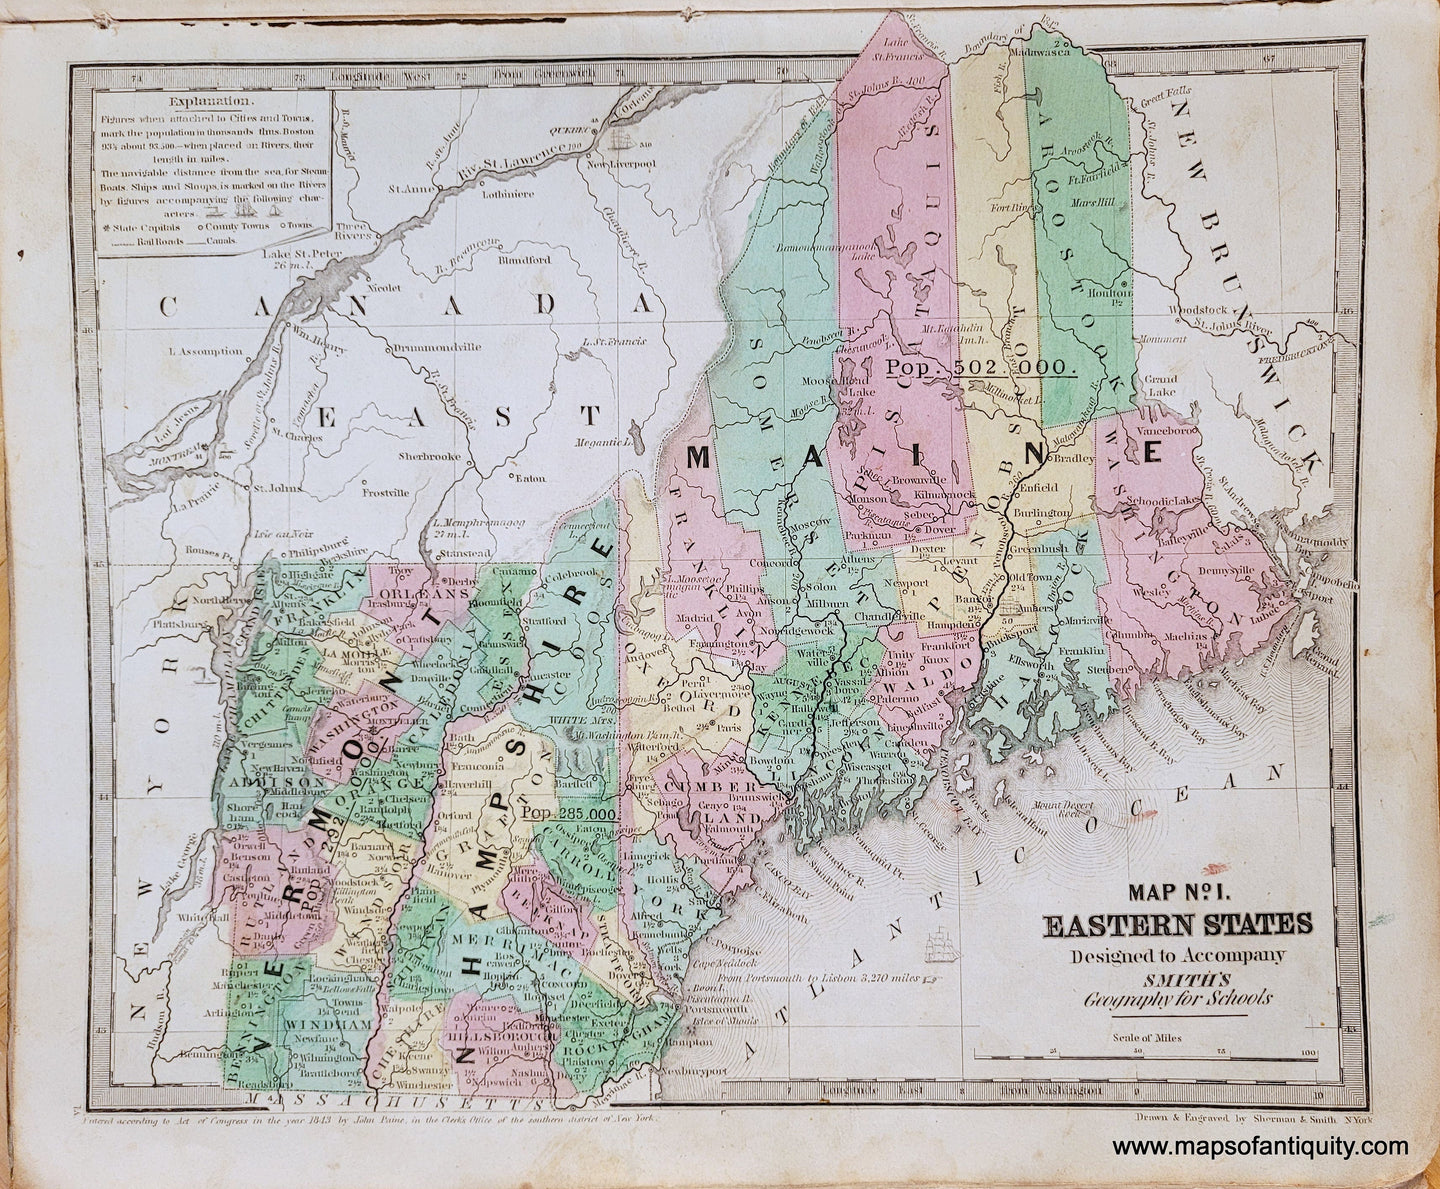 Genuine-Antique-Map-Map-No-1-Eastern-States-1839-Smith-Paine-Burgess-Maps-Of-Antiquity